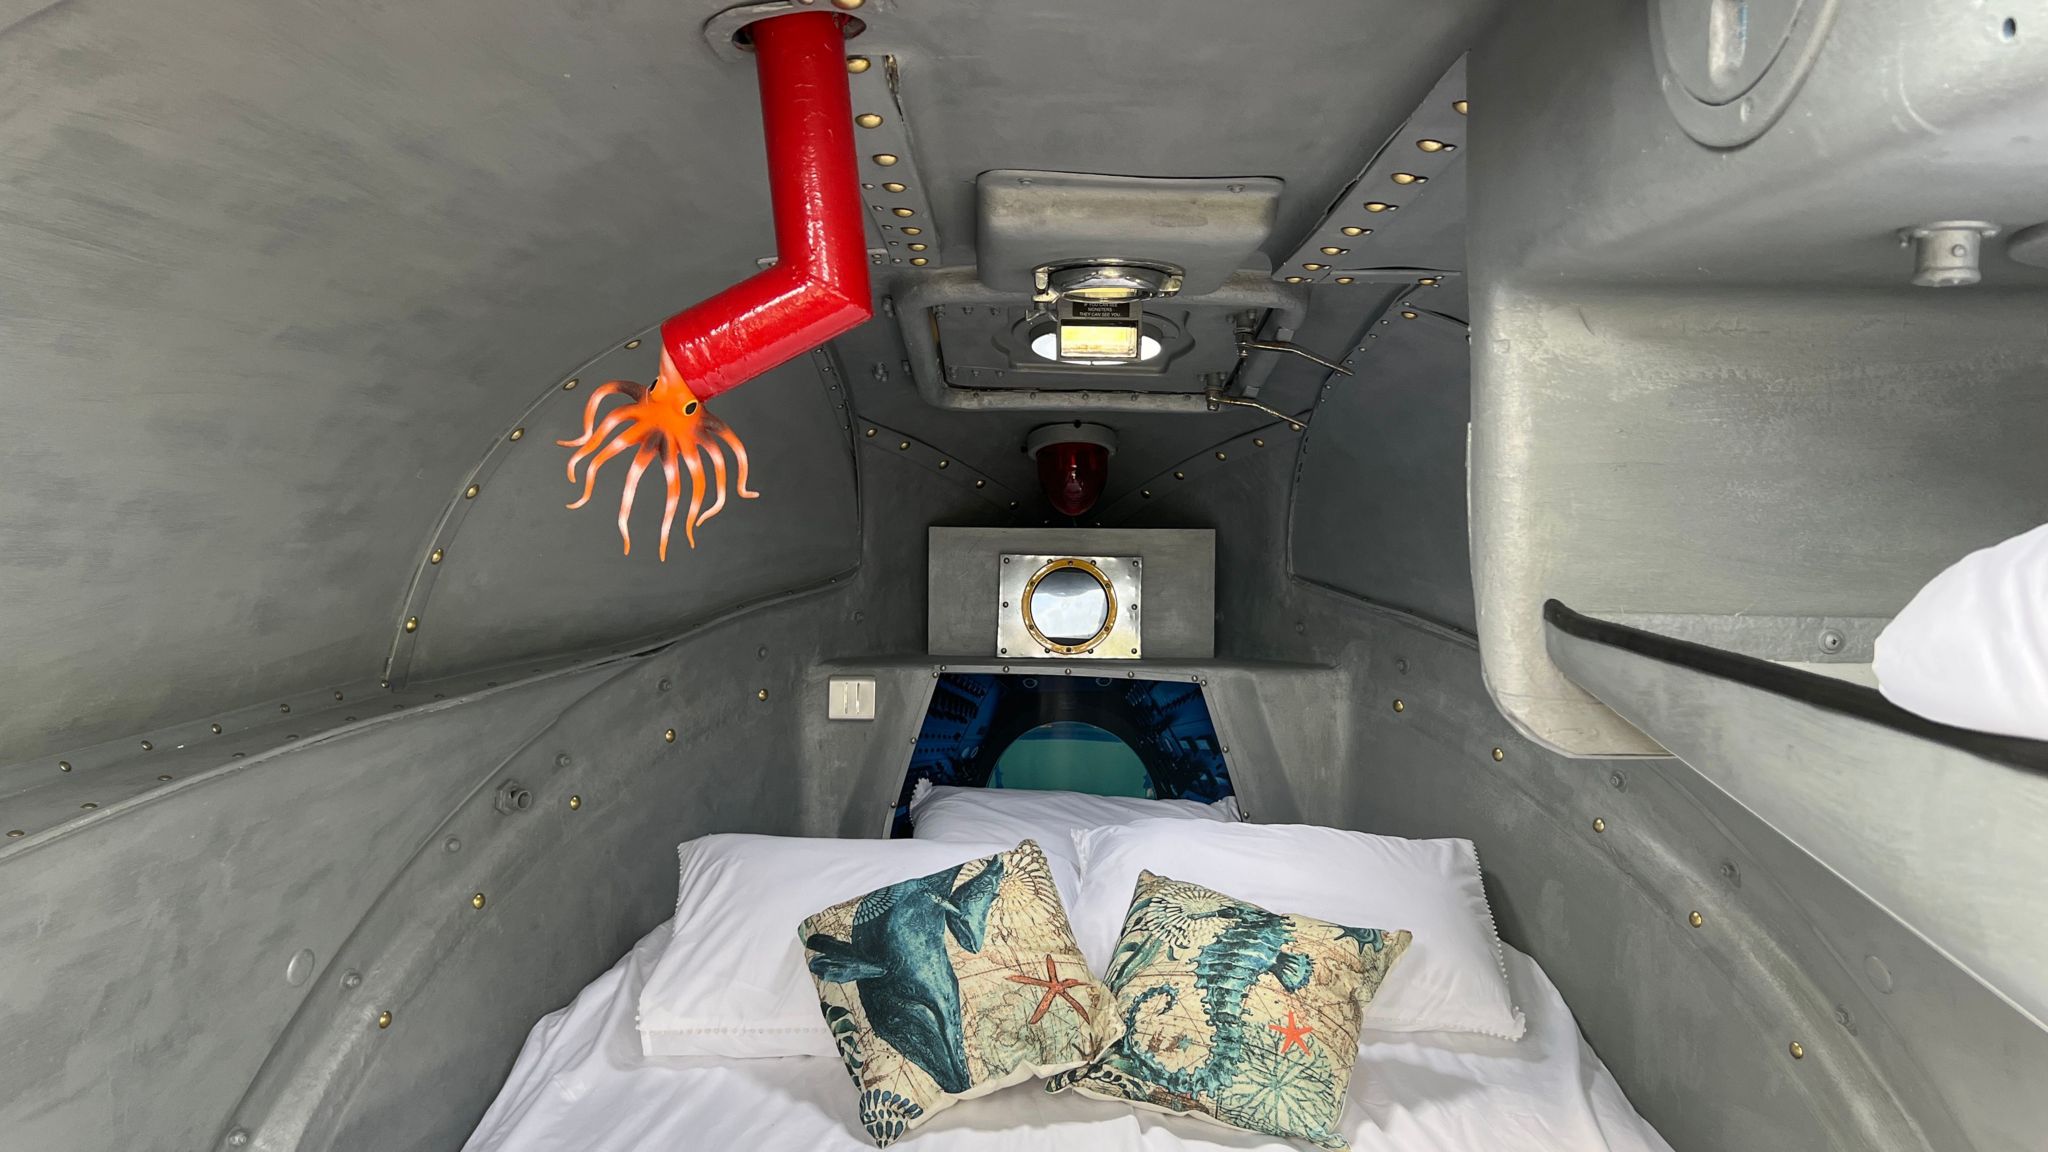 A bed inside the glamping submarine at Cheddar